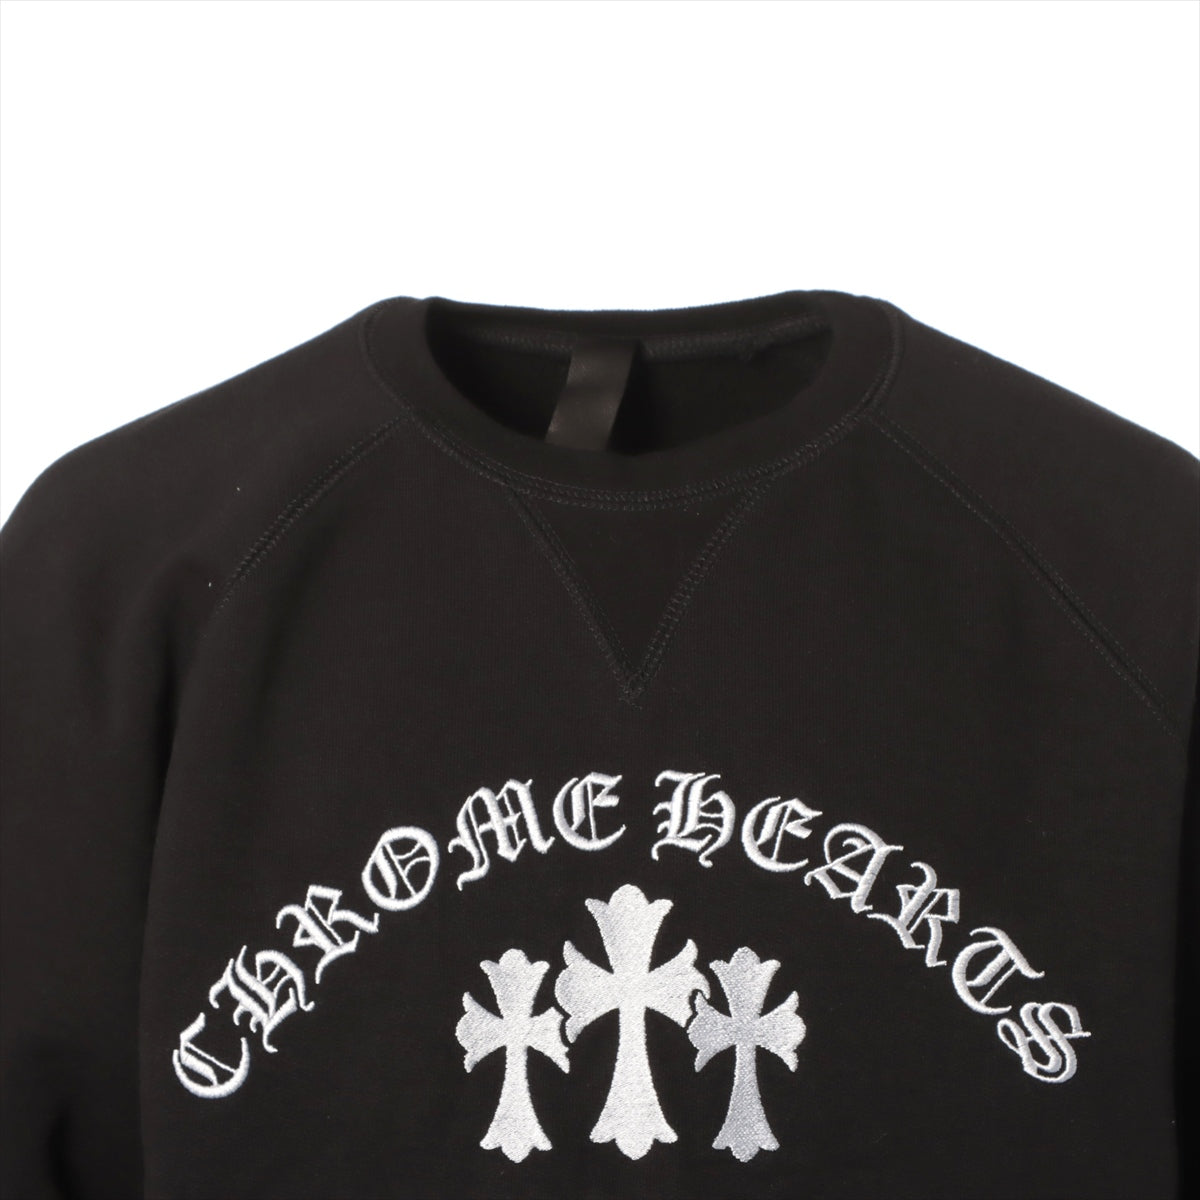 Chrome Hearts Y NOT Basic knitted fabric Cotton size XL Black Cemetery cross logo embroidery